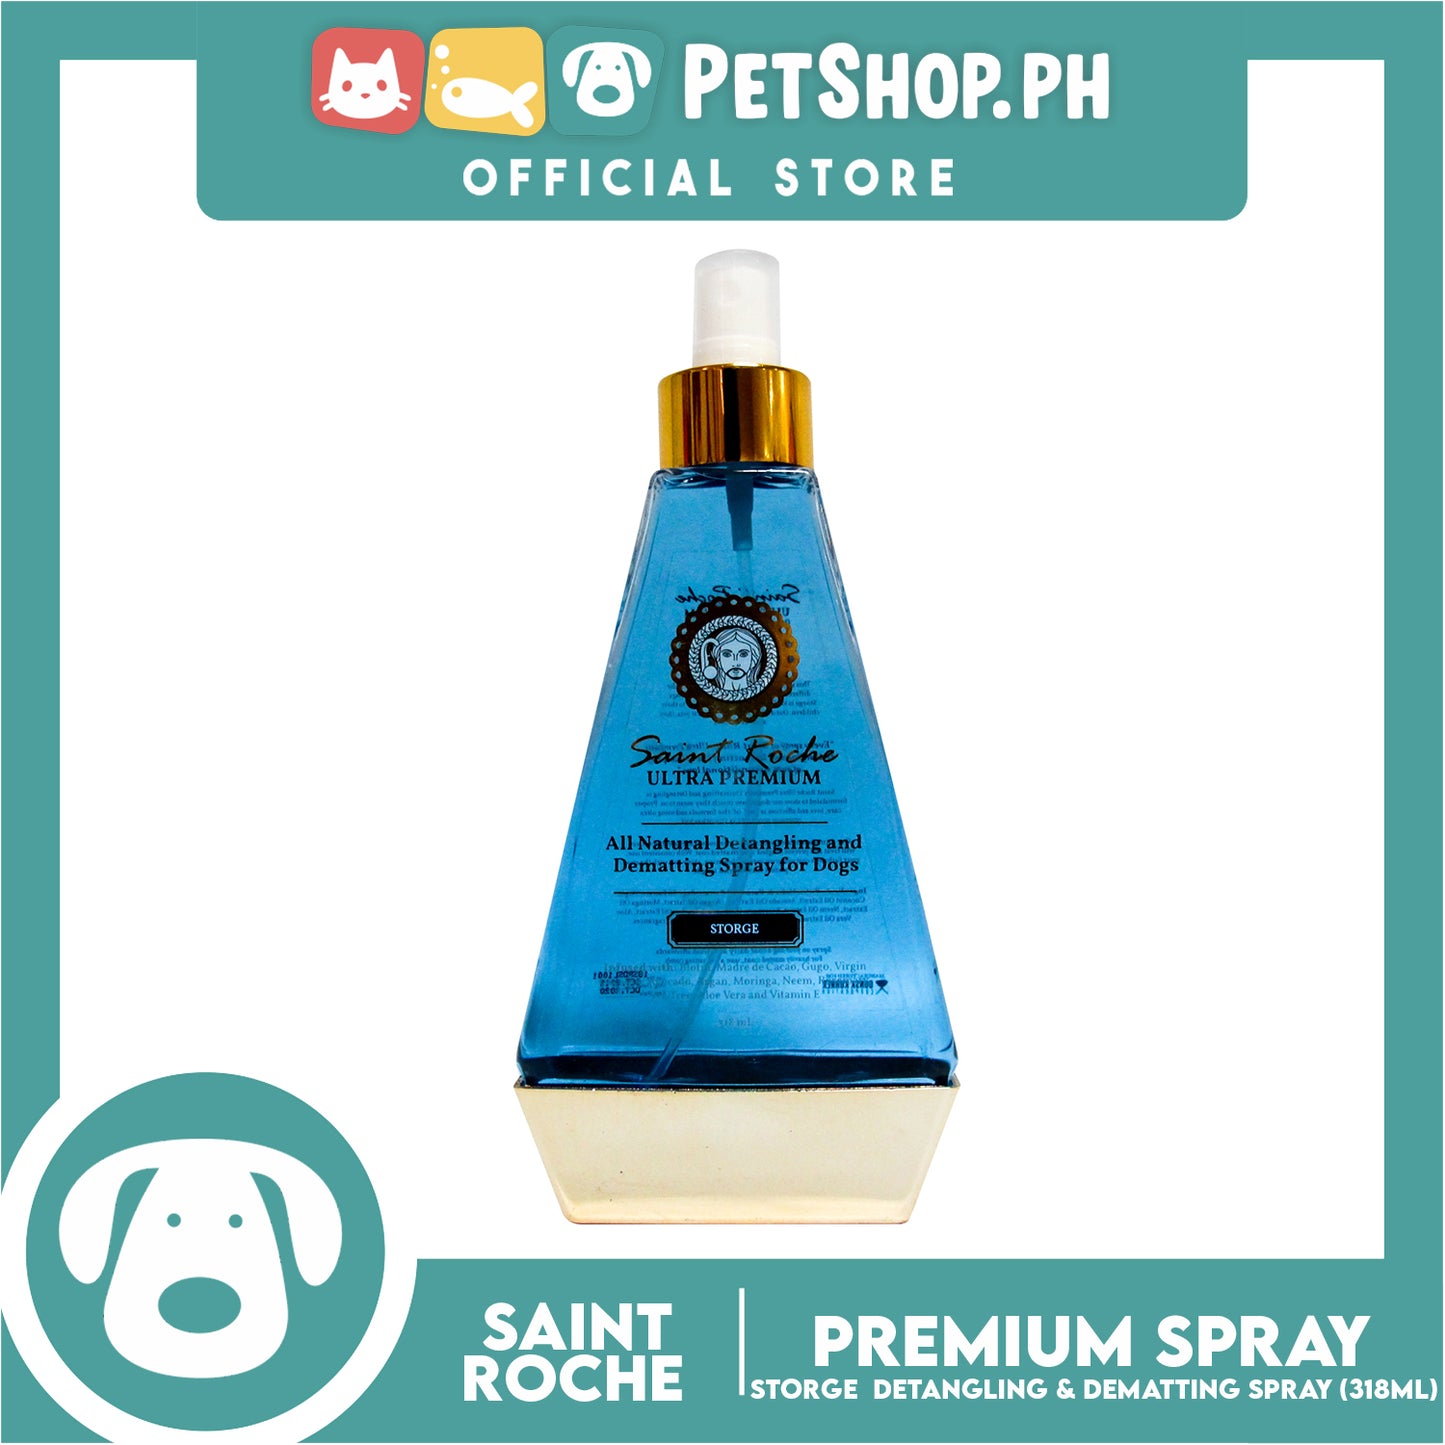 Saint Roche Ultra Premium All Natural Detangling and Dematting Spray for Dogs 318ml (Storge)